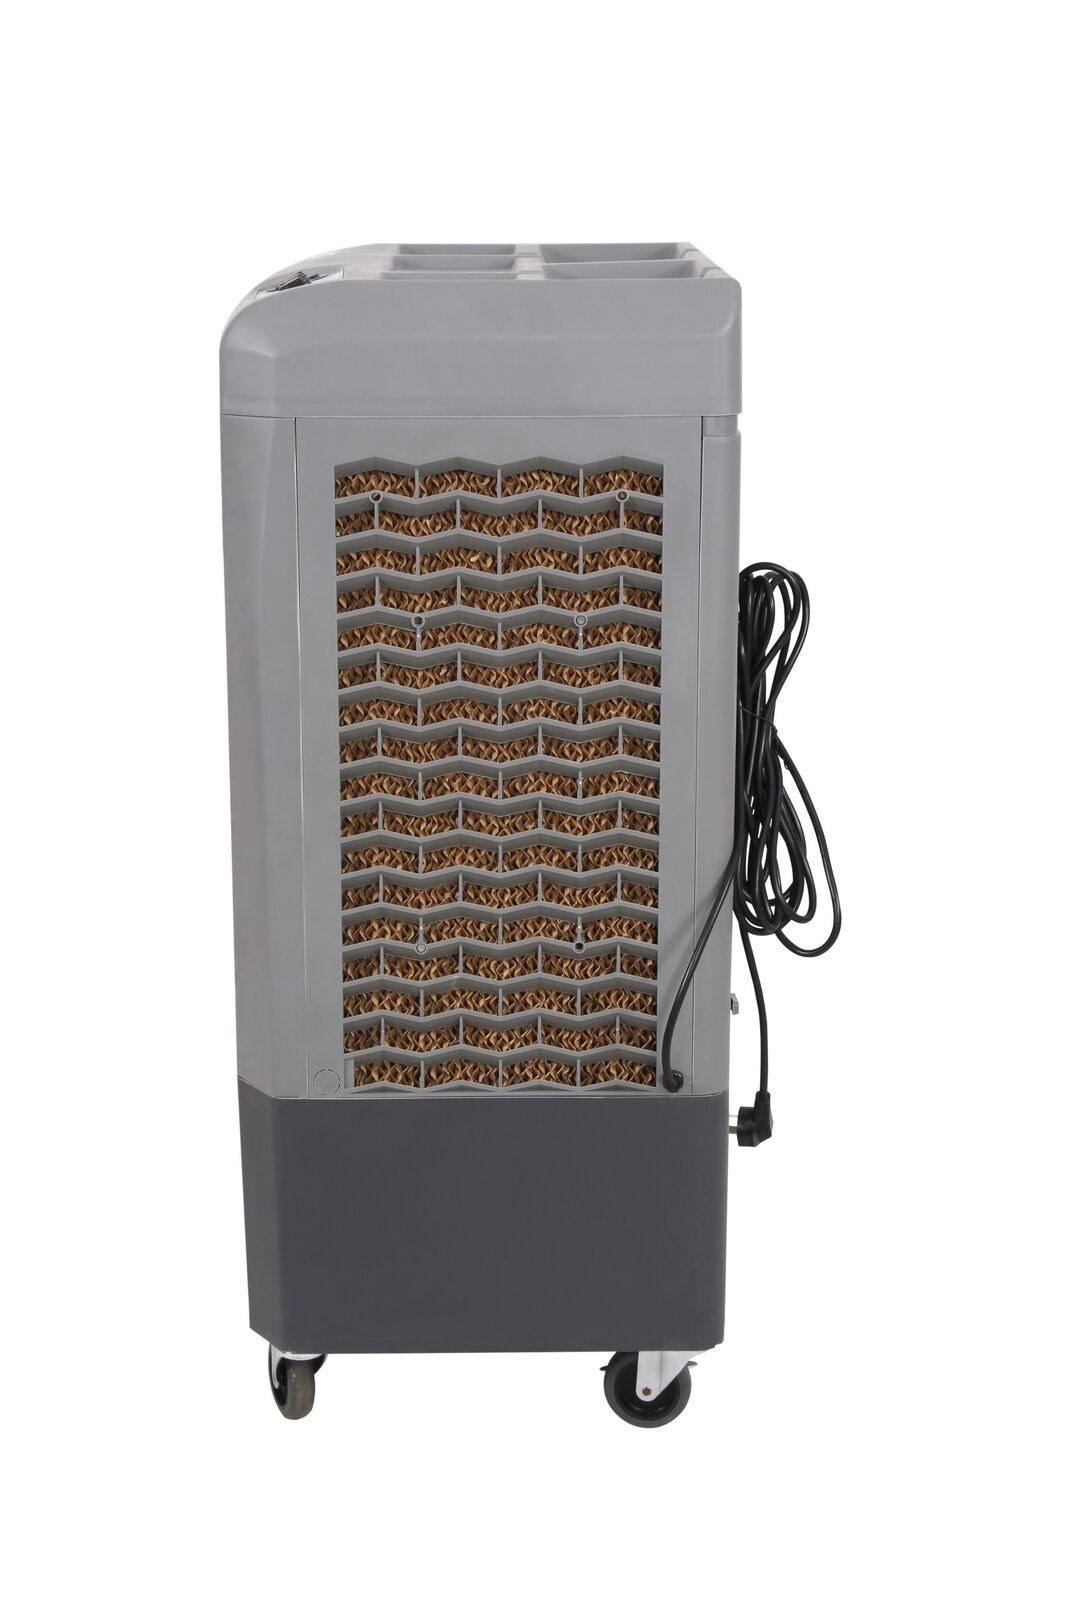 Hessaire MC37M Indoor/Outdoor Portable 950 Sq Ft Evaporative Air Cooler - image 4 of 16